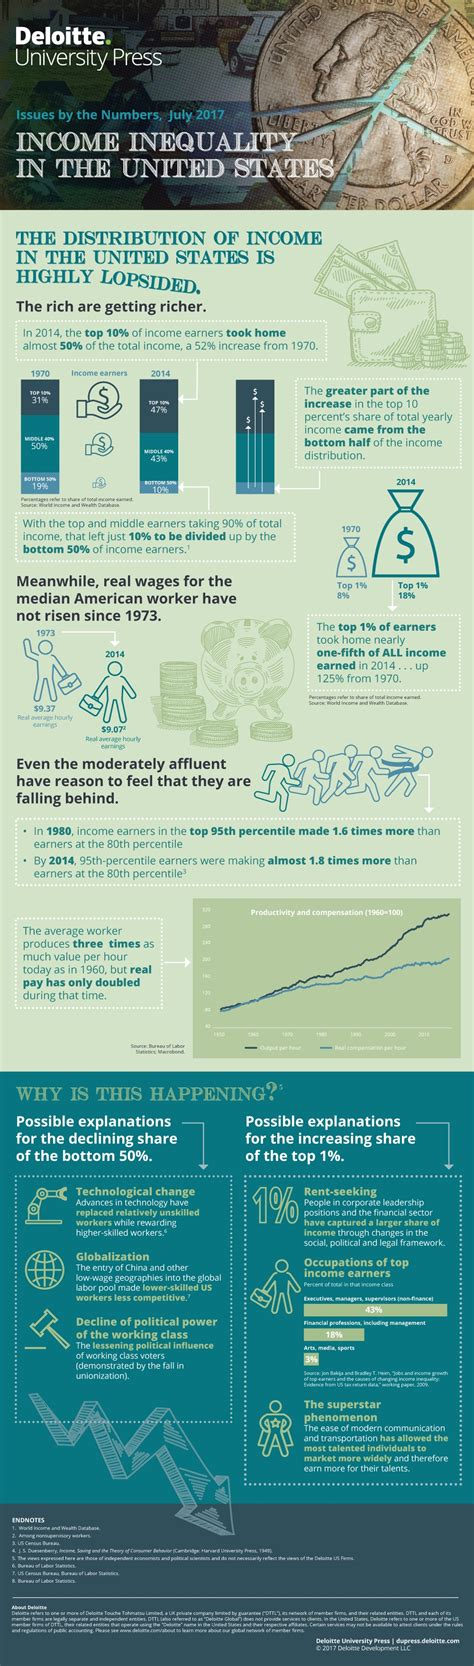 Infographic Rising Income Inequality In The United States Deloitte